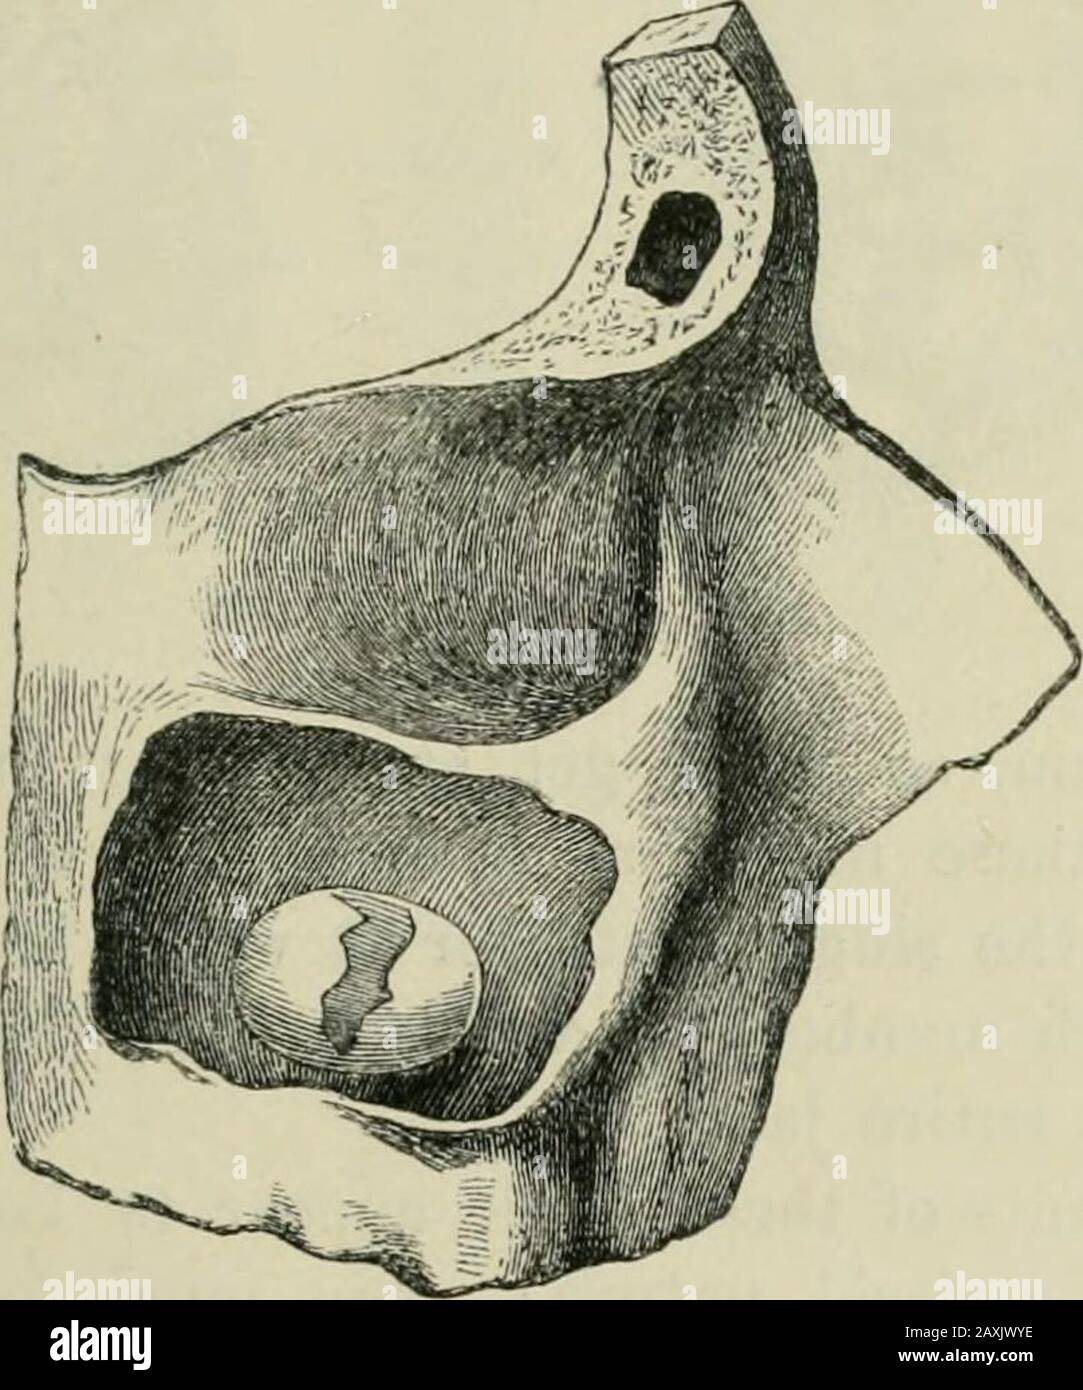 Injuries and diseases of the jaws . reserious operation ; but a case has occurred within my ownknowledge in which a very able surgeon removed the upperjaw before discovering the error of his diagnosis. M. Giraldes would appear to have been the first authorupon the subject of cysts of the antrum, and his thesisgained the Montyon prize in 1853: but Mr. W. Adams mayfairly claim priority of investigation, as shown by specimenspreserved in St. Thomass Museum—as indeed is acknow-ledged by M. Giraldes. Luschka subsequently investigatedthe subject, and in sixty post-mortem examinations foundcystic gro Stock Photo